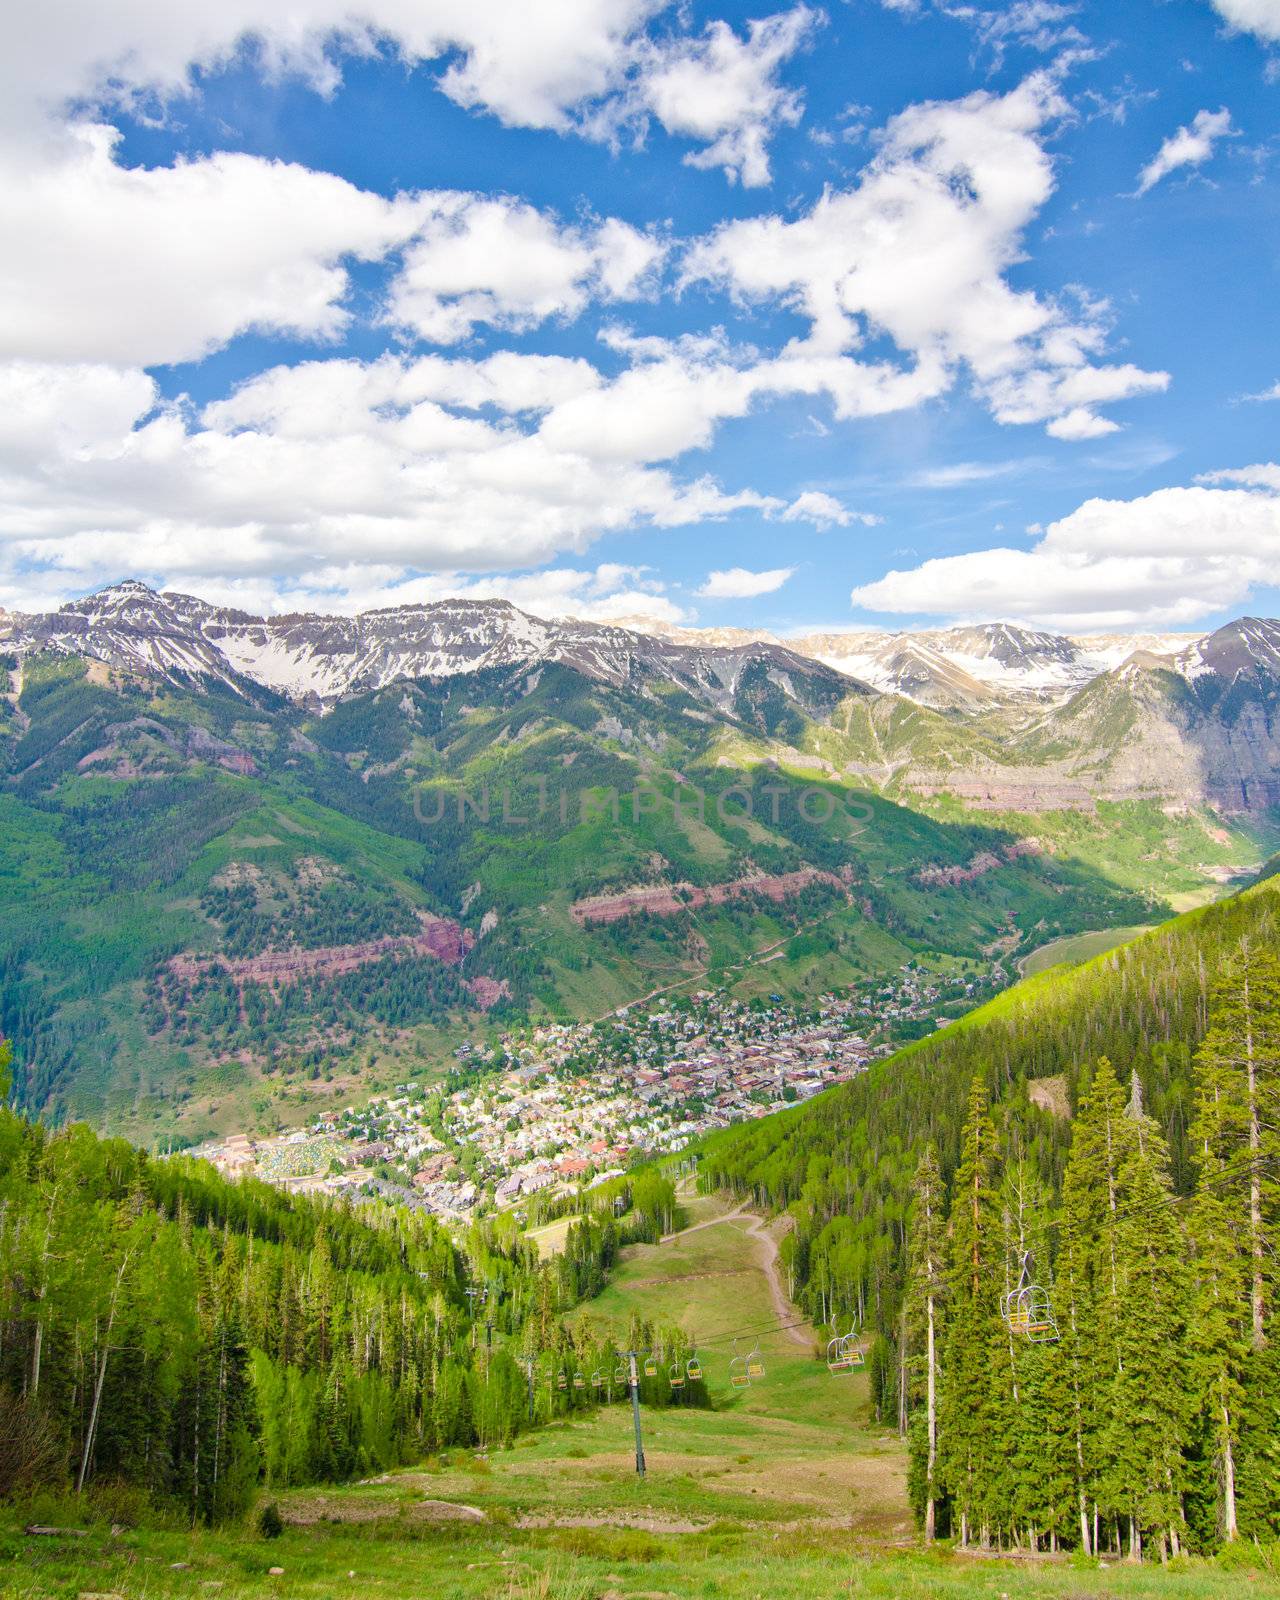 Telluride, Colorado, the Most Beautiful City in the USA by robert.bohrer25@gmail.com